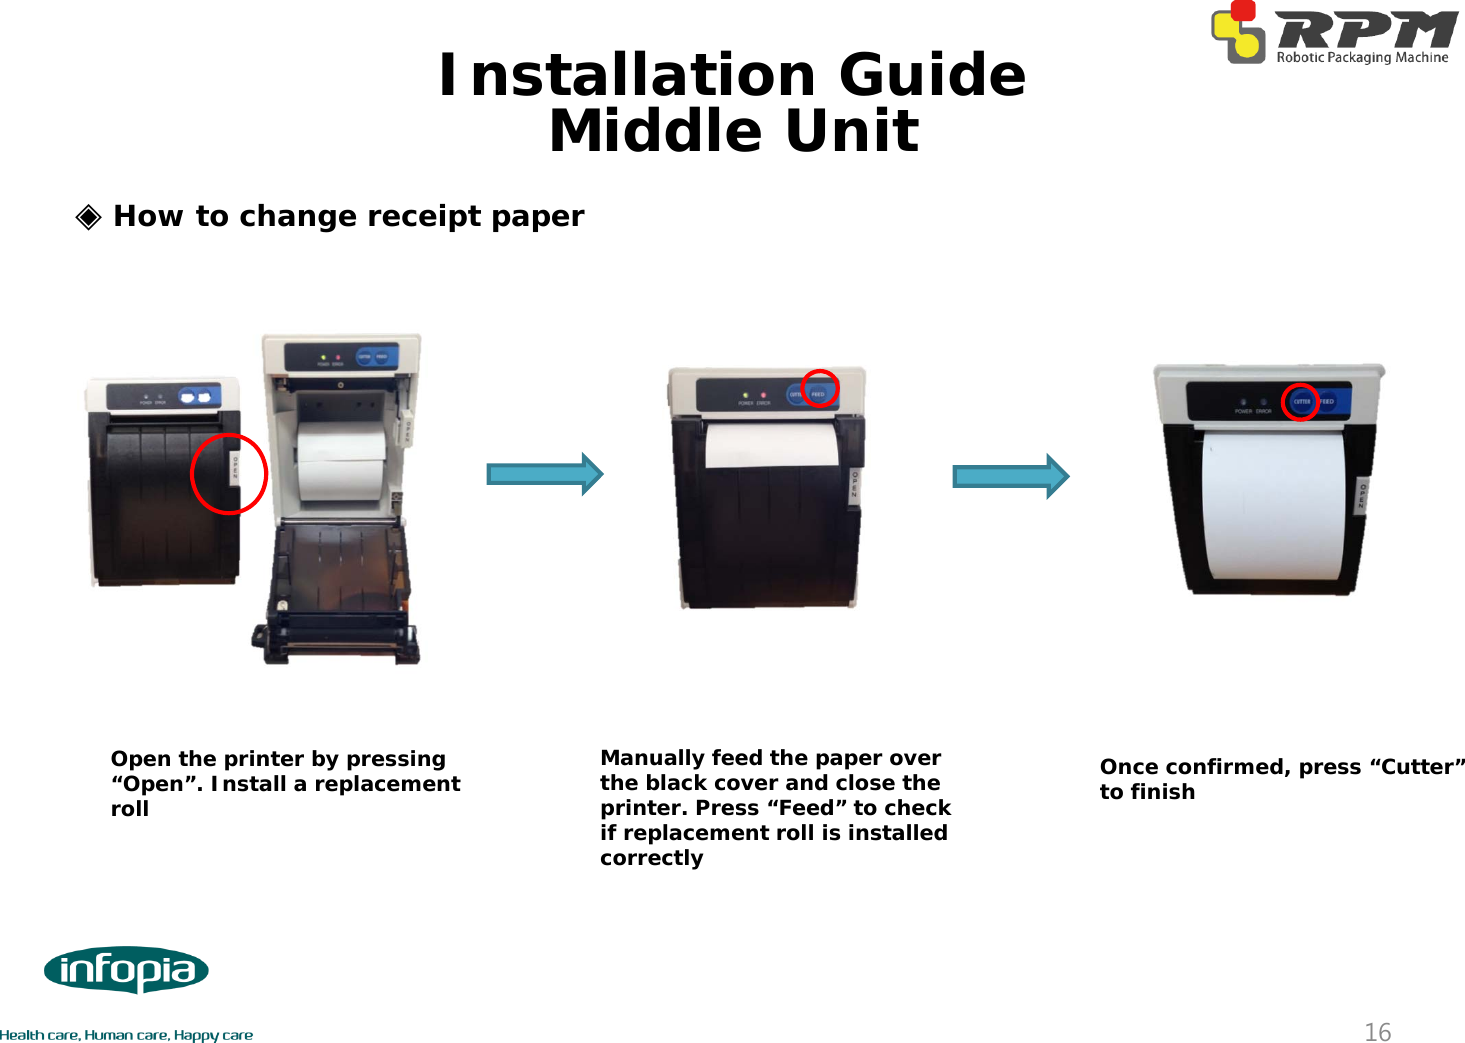 ◈How to change receipt paperOpen the printer by pressing “Open”. Install a replacement rollManually feed the paper over the black cover and close the printer. Press “Feed” to check if replacement roll is installed correctly Once confirmed, press “Cutter” to finish Middle Unit16Installation Guide